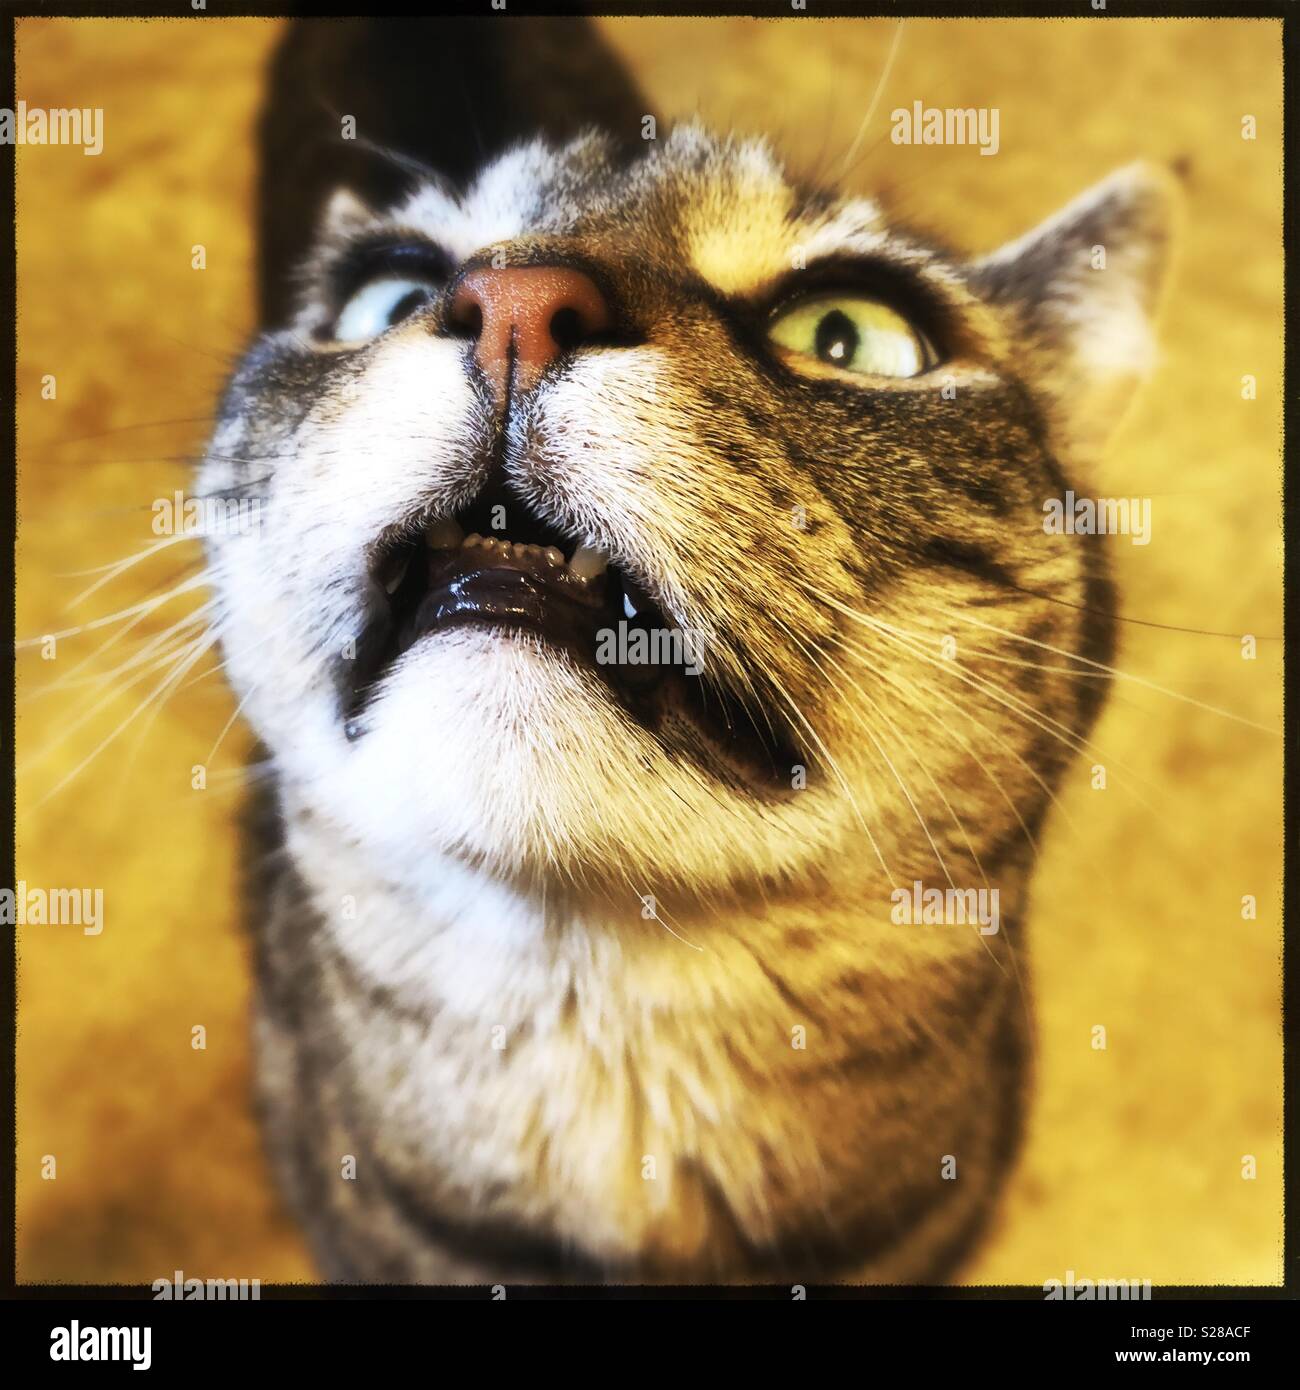 Hungry funny tabby cat closeup showing her teeth Stock Photo